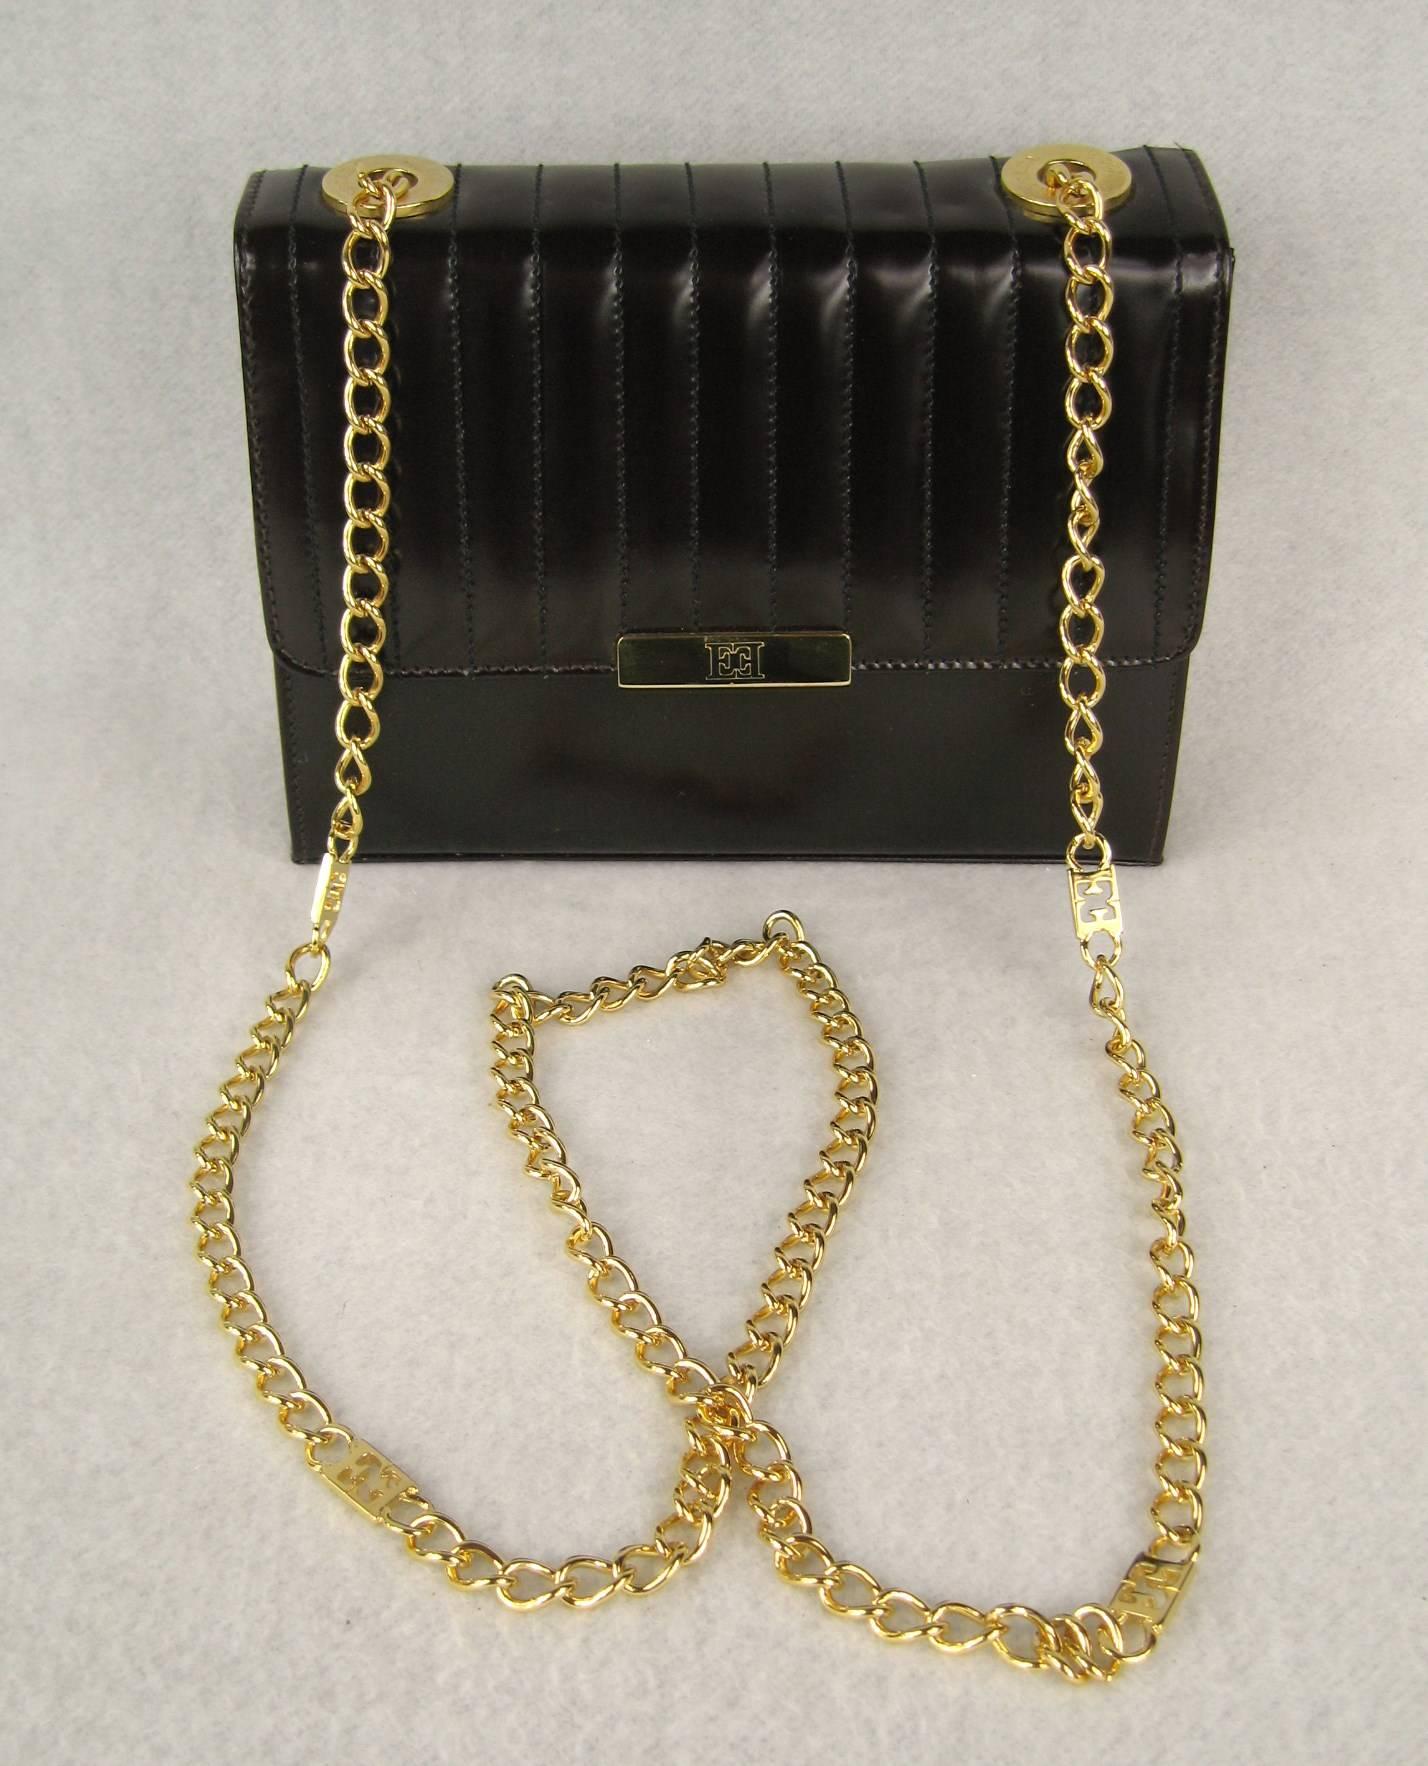 Kelly Brown Leather Ribbed Leather hand bag. Tags still in hand bag along with dust cover. Gold Tone link chain as shoulder strap. Zippered inside compartment. Gold Leather lining. Measures - 8 in. x 6 in.  x 3 in. deep - 24 in.  long chain strap.